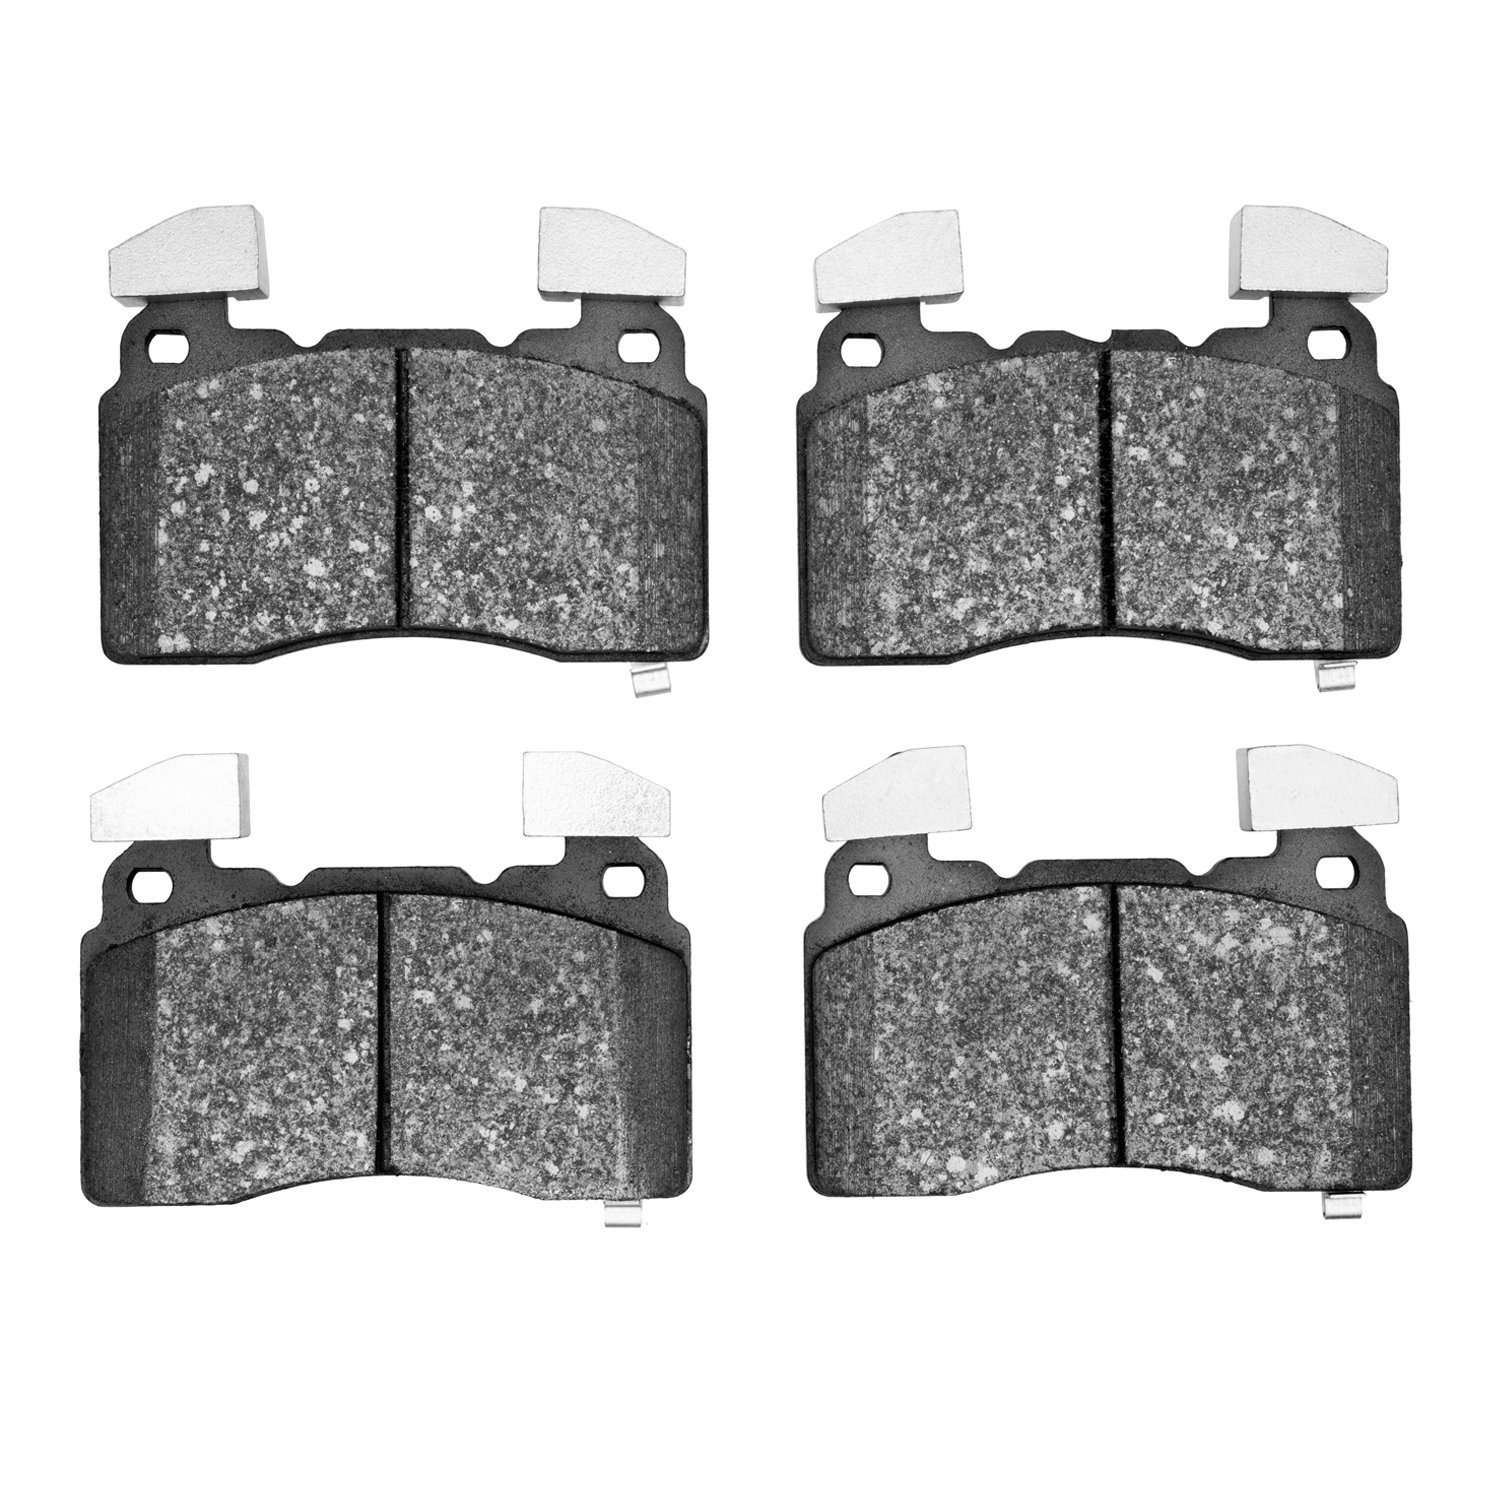 1551-1474-10 5000 Advanced Low-Metallic Brake Pads, Fits Select Multiple Makes/Models, Position: Front